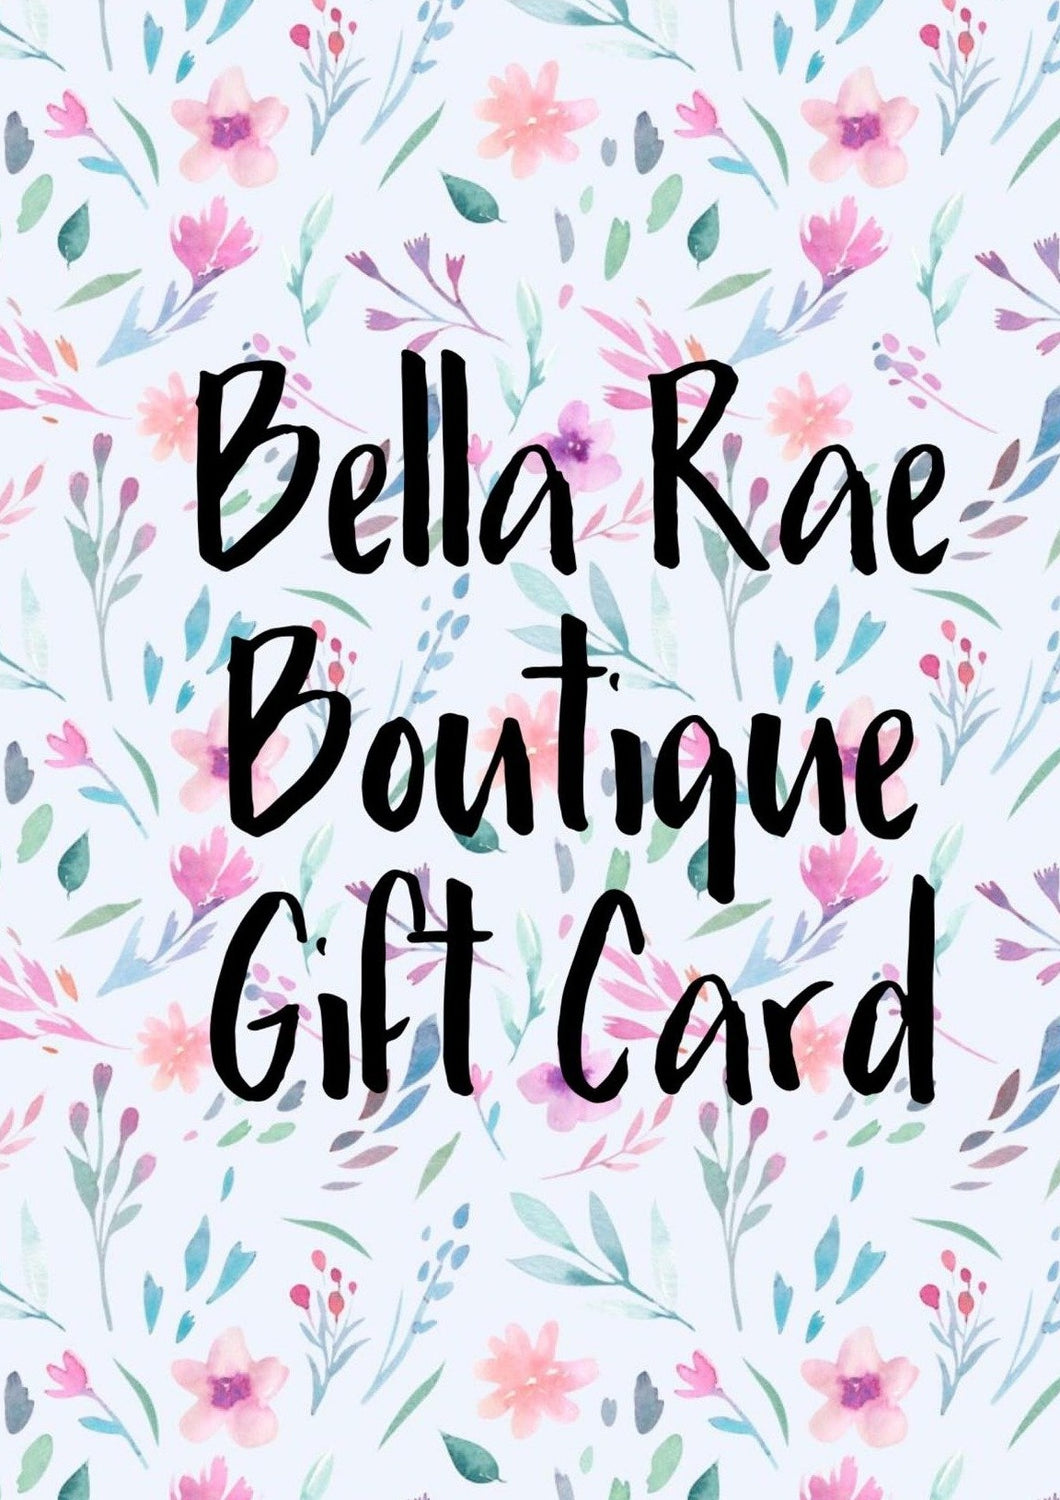 Bella Rae Boutique Gift Card